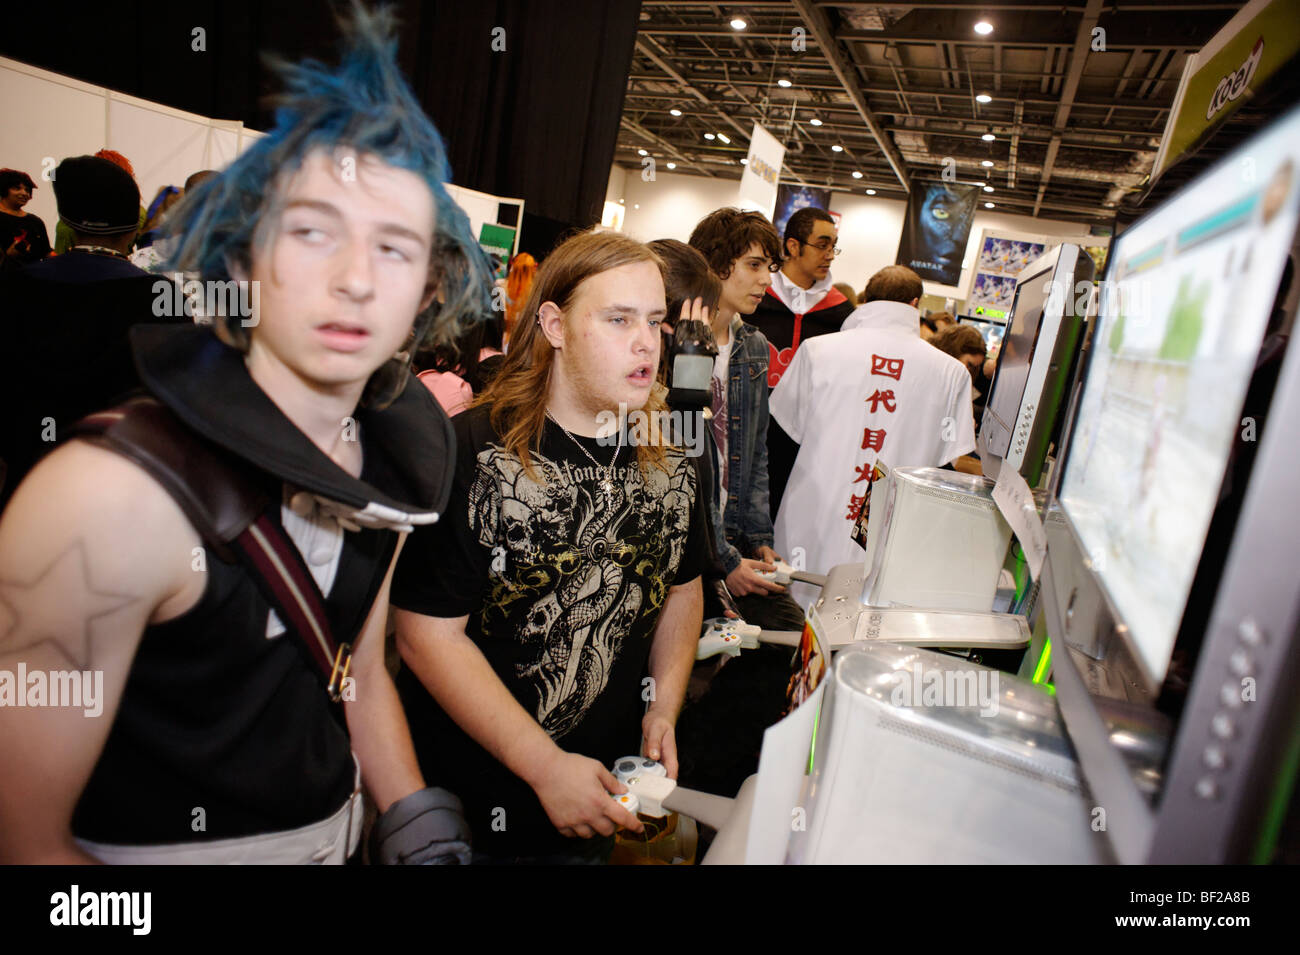 Fans playing video games at the London MCM expo. Britain 2009. Stock Photo